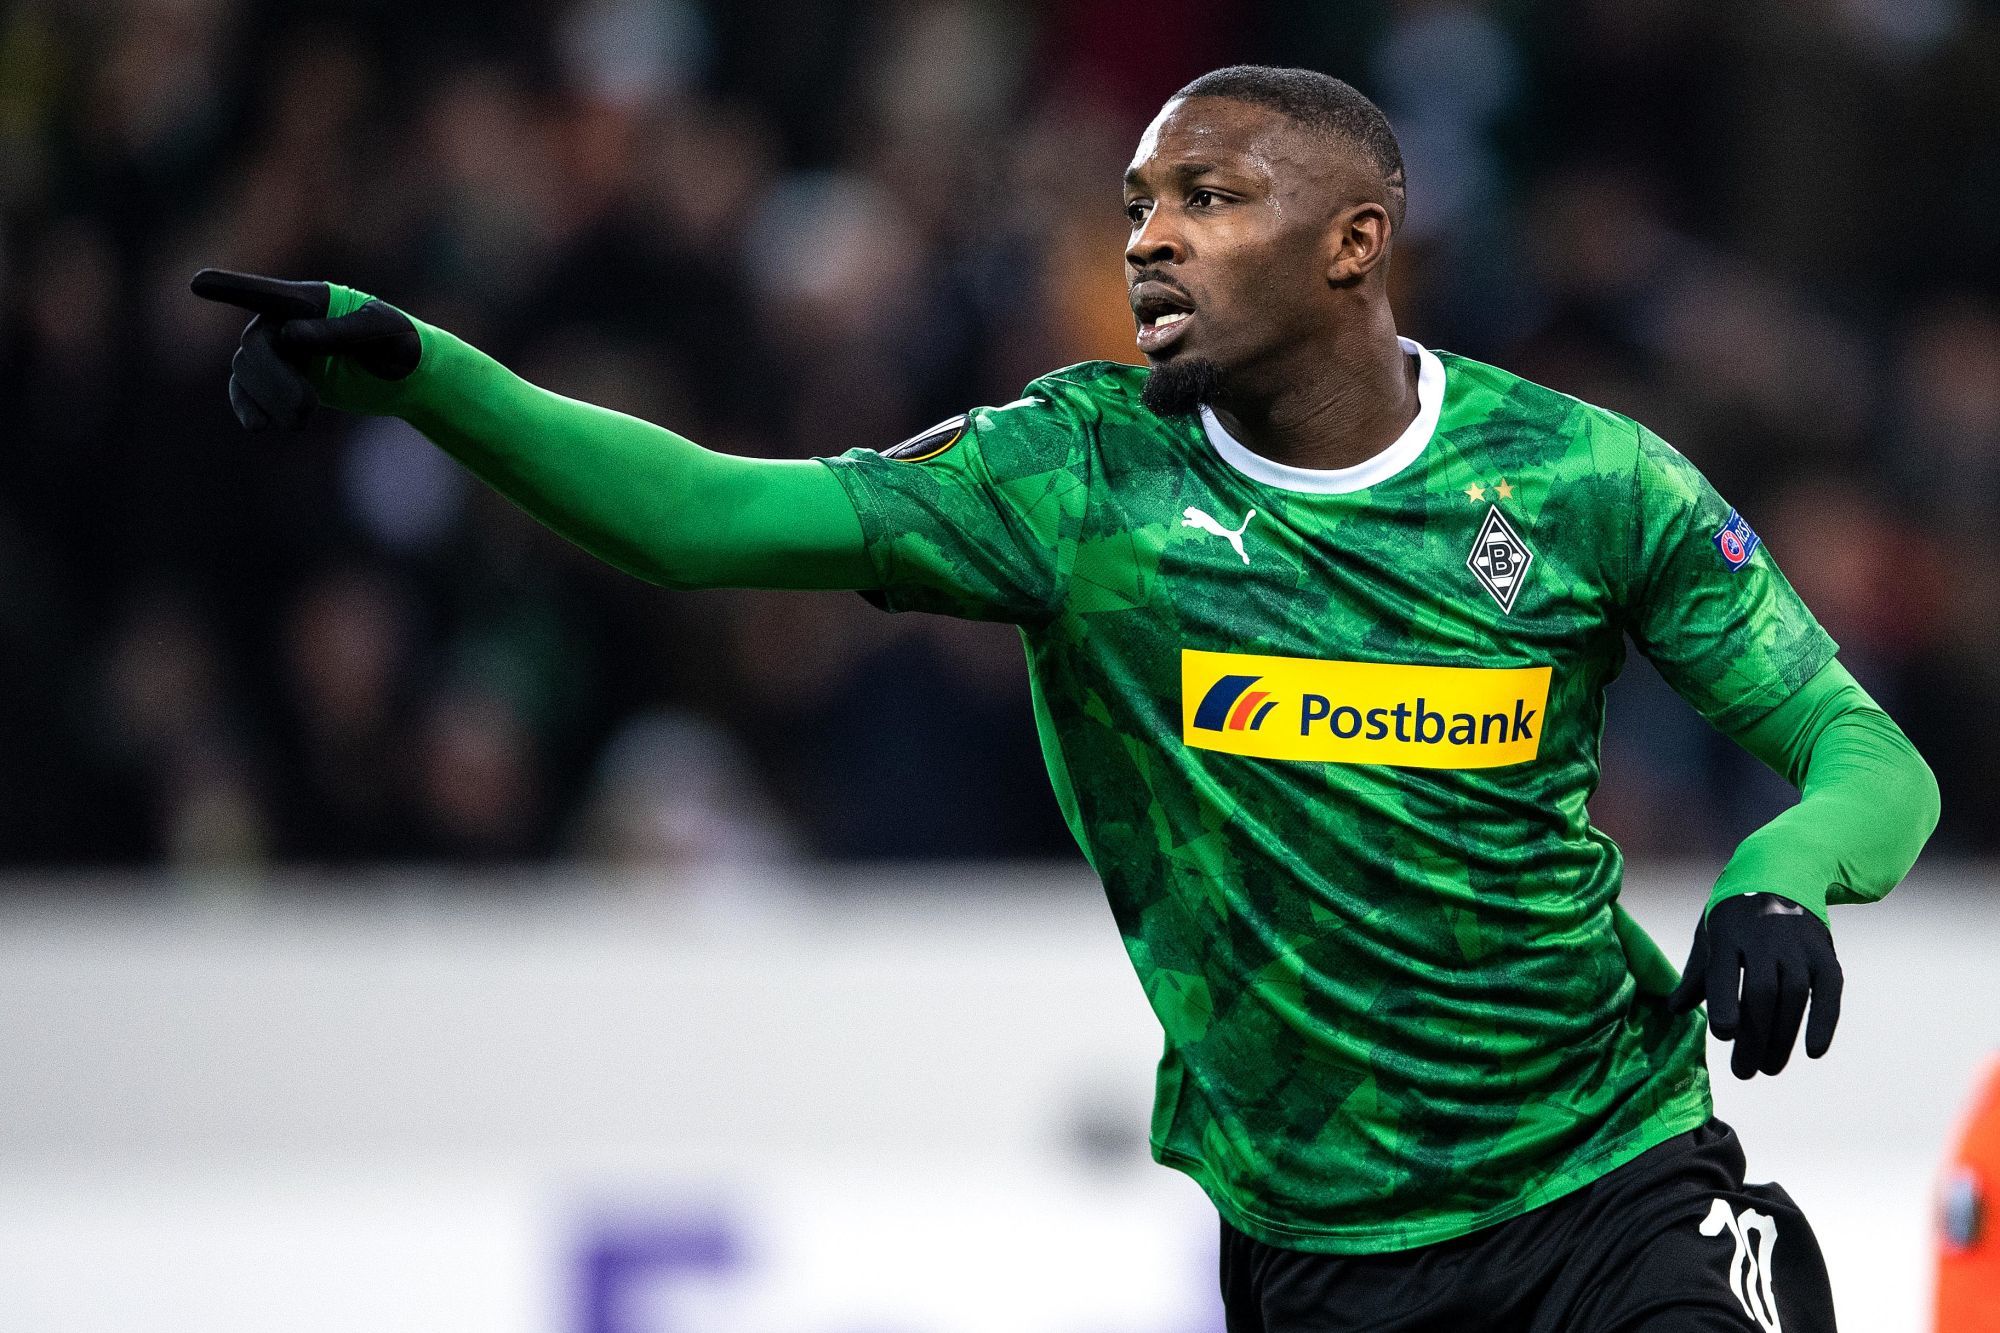 12 December 2019, North Rhine-Westphalia, Mˆnchengladbach: Soccer: Europa League, Borussia Mˆnchengladbach - Istanbul Basaksehir, Group stage, Group J, 6th matchday in Borussia Park. Gladbach's scorer Marcus Thuram rejoices after his goal for the 1-0 lead. Photo: Marius Becker/dpa 
Photo by Icon Sport - Marcus THURAM - Borussia-Park - Monchengladbach (Allemagne)